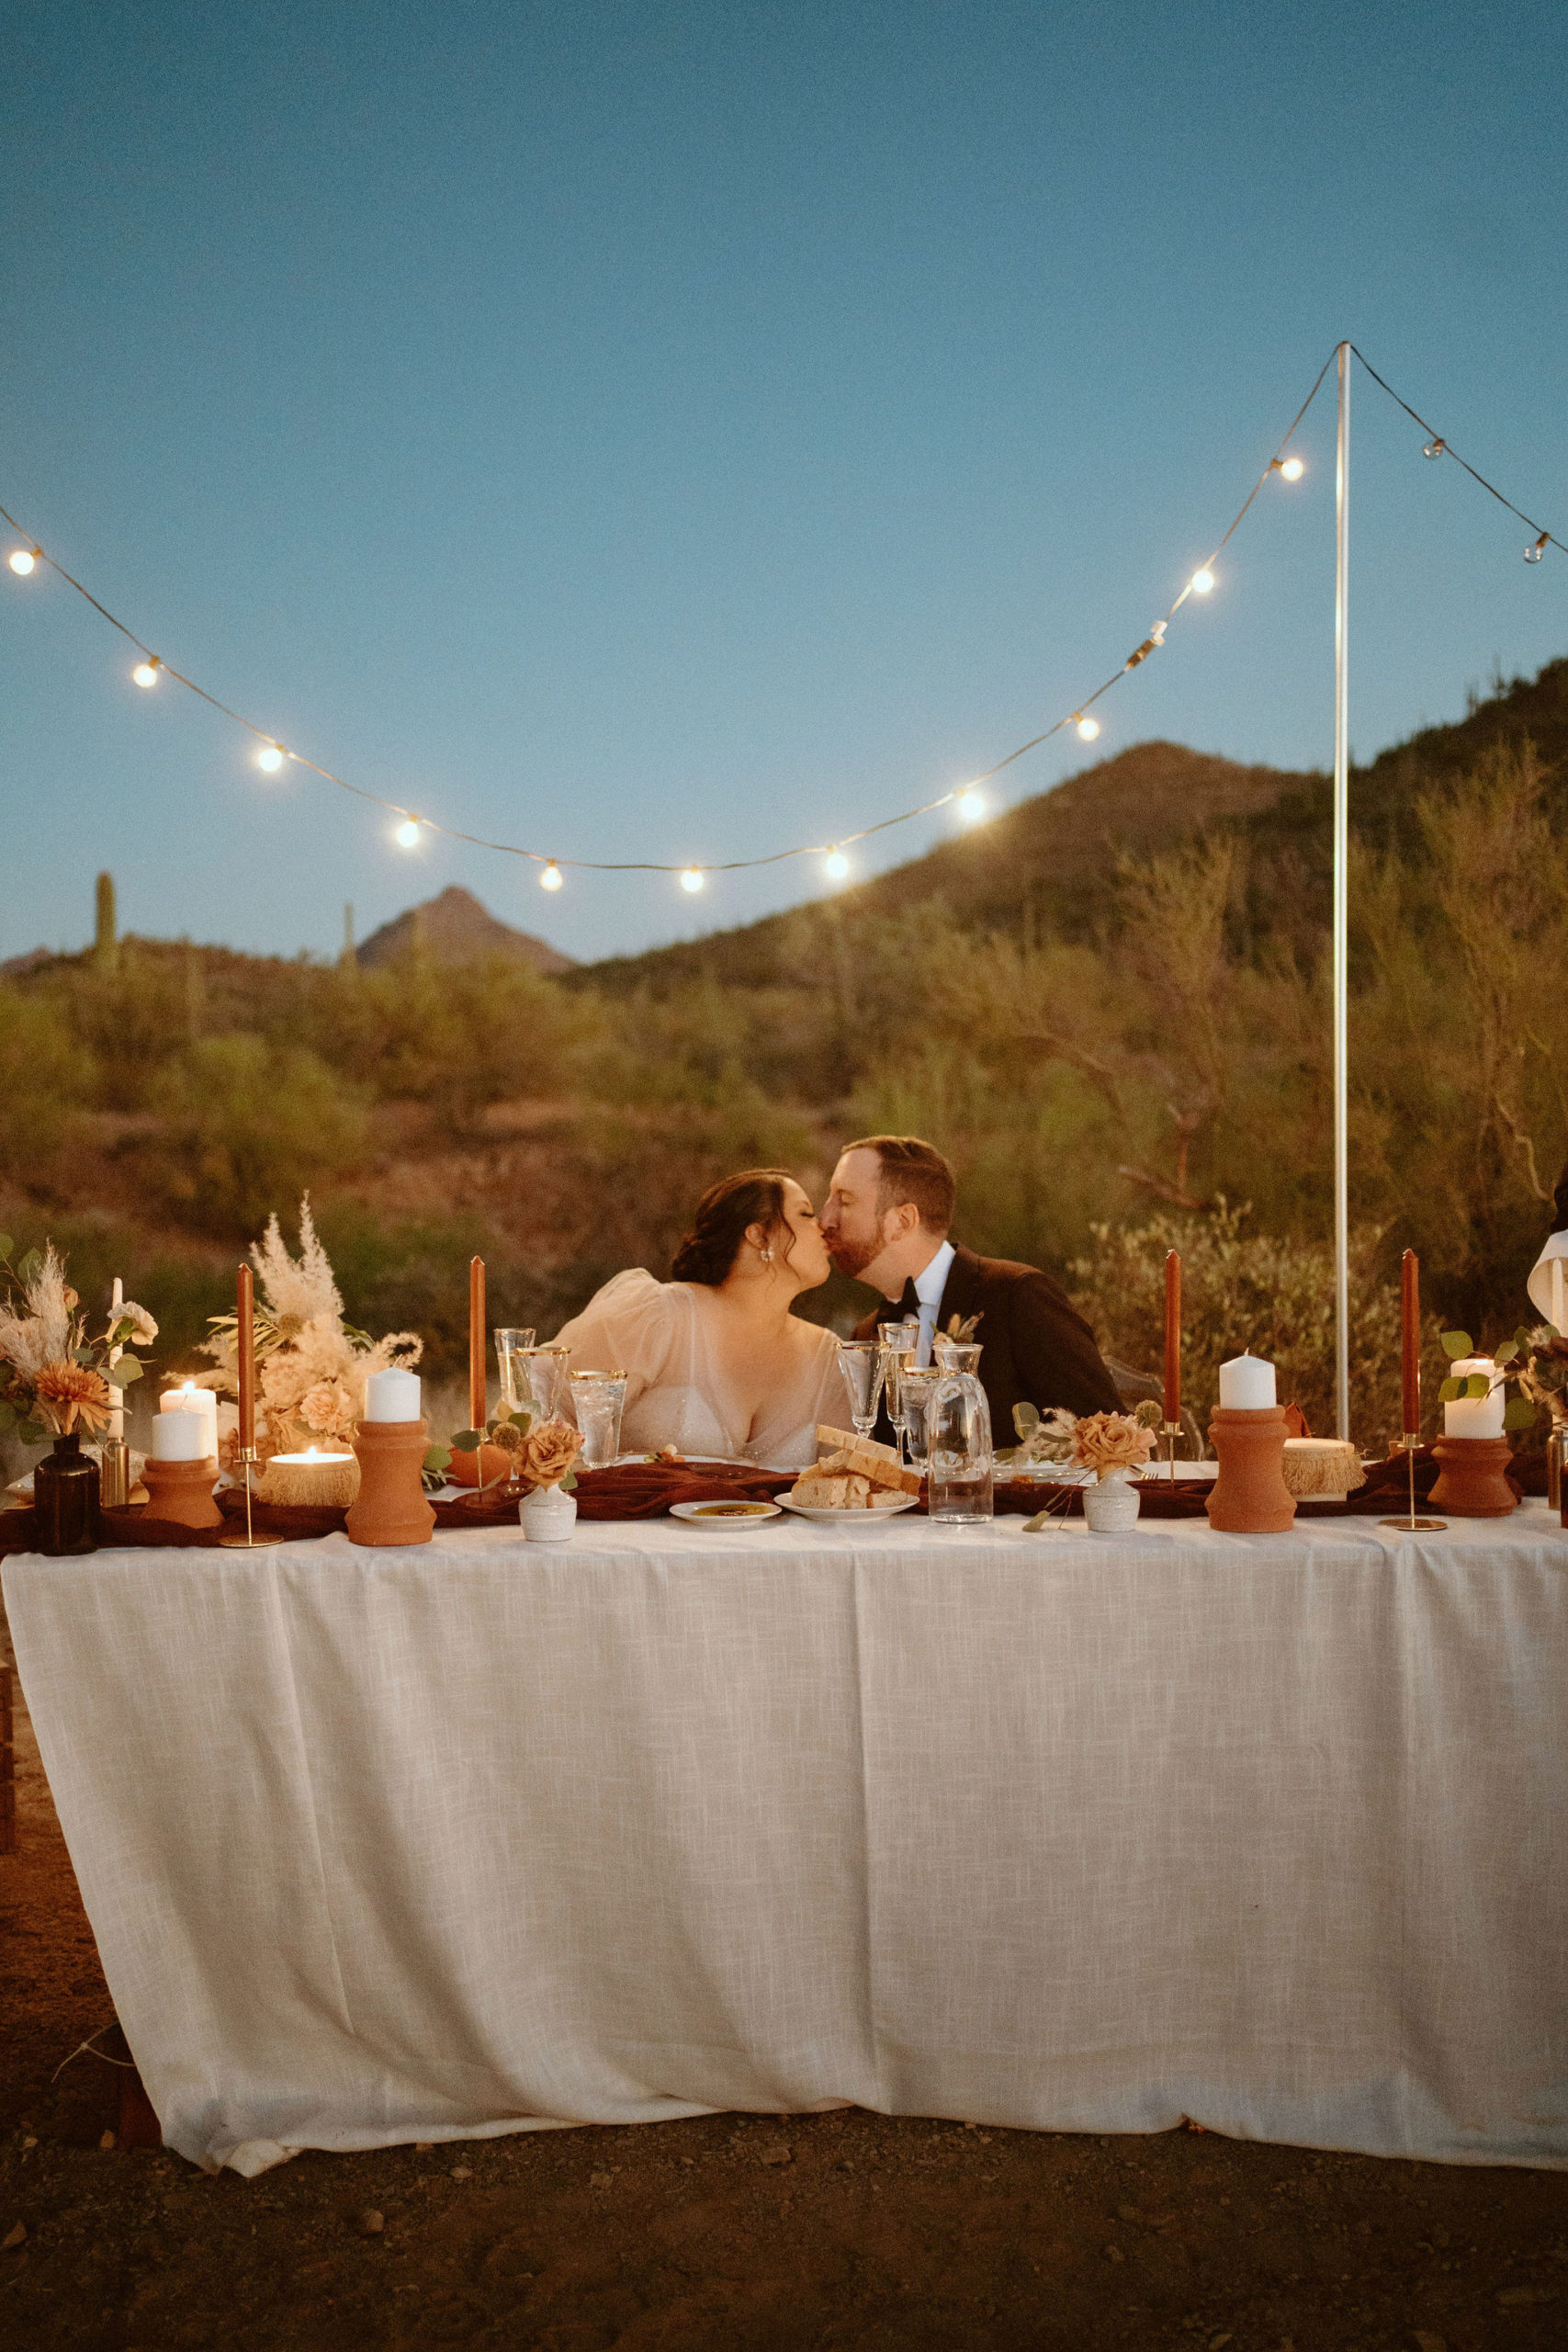 Saguaro National Park Micro-Wedding. The newlyweds kiss at the sweetheart table in the middle of the desert